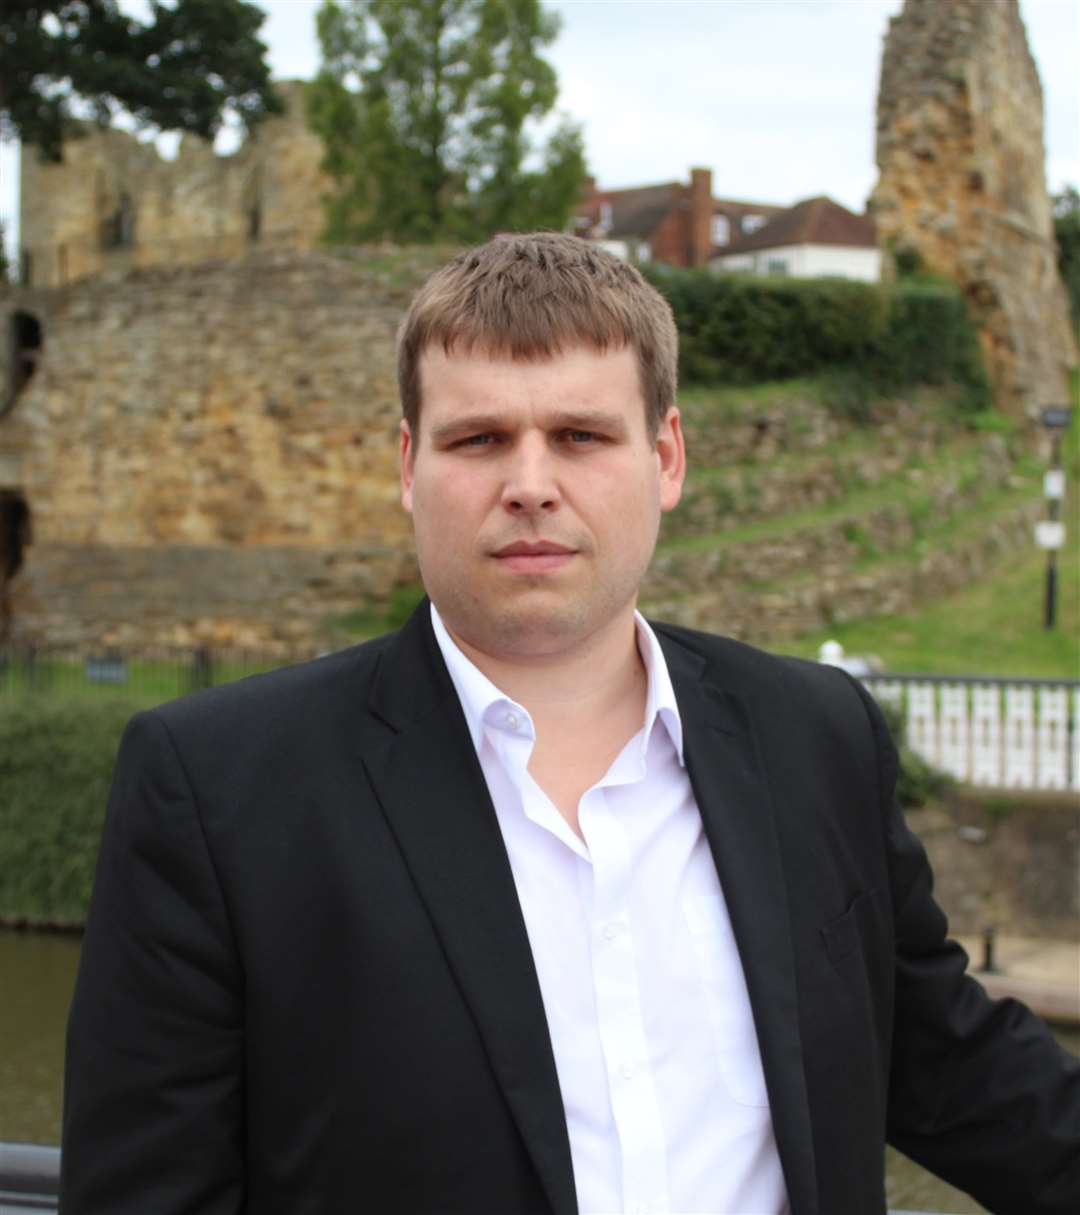 Conservative Matt Boughton will still be council leader after the vote - whatever the outcome